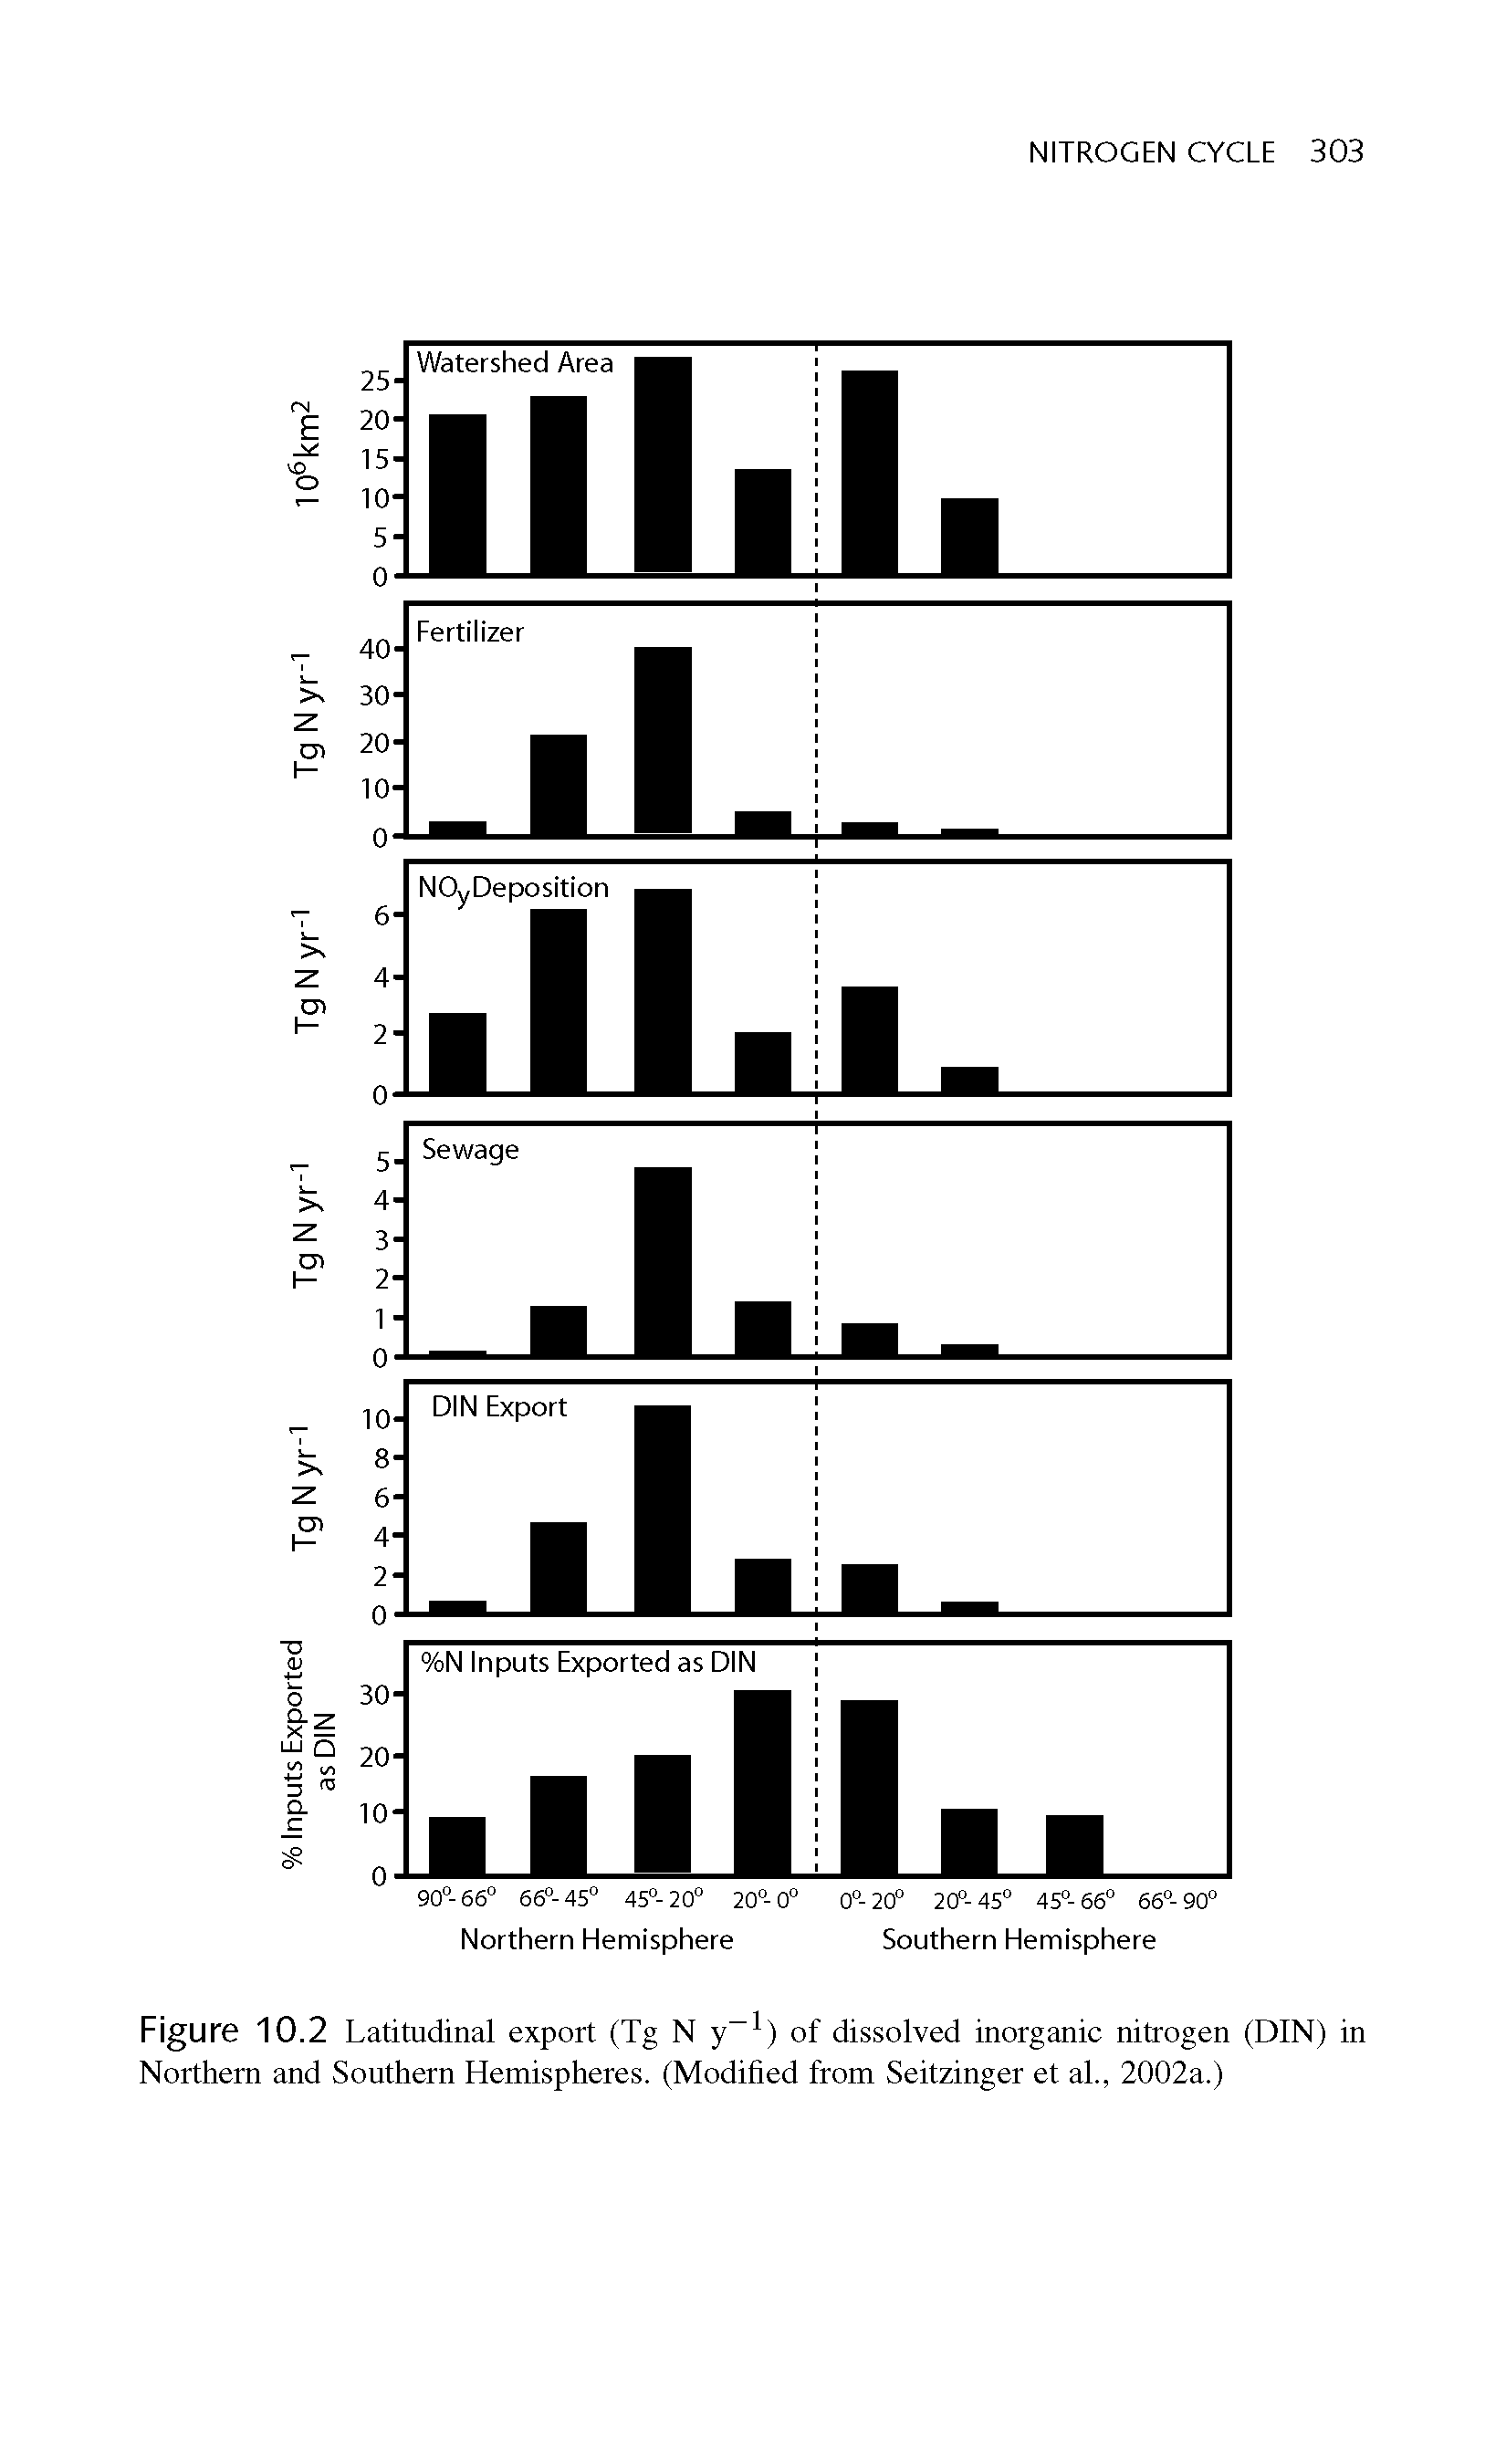 Figure 10.2 Latitudinal export (Tg N y ) of dissolved inorganic nitrogen (DIN) in Northern and Southern Hemispheres. (Modified from Seitzinger et al., 2002a.)...